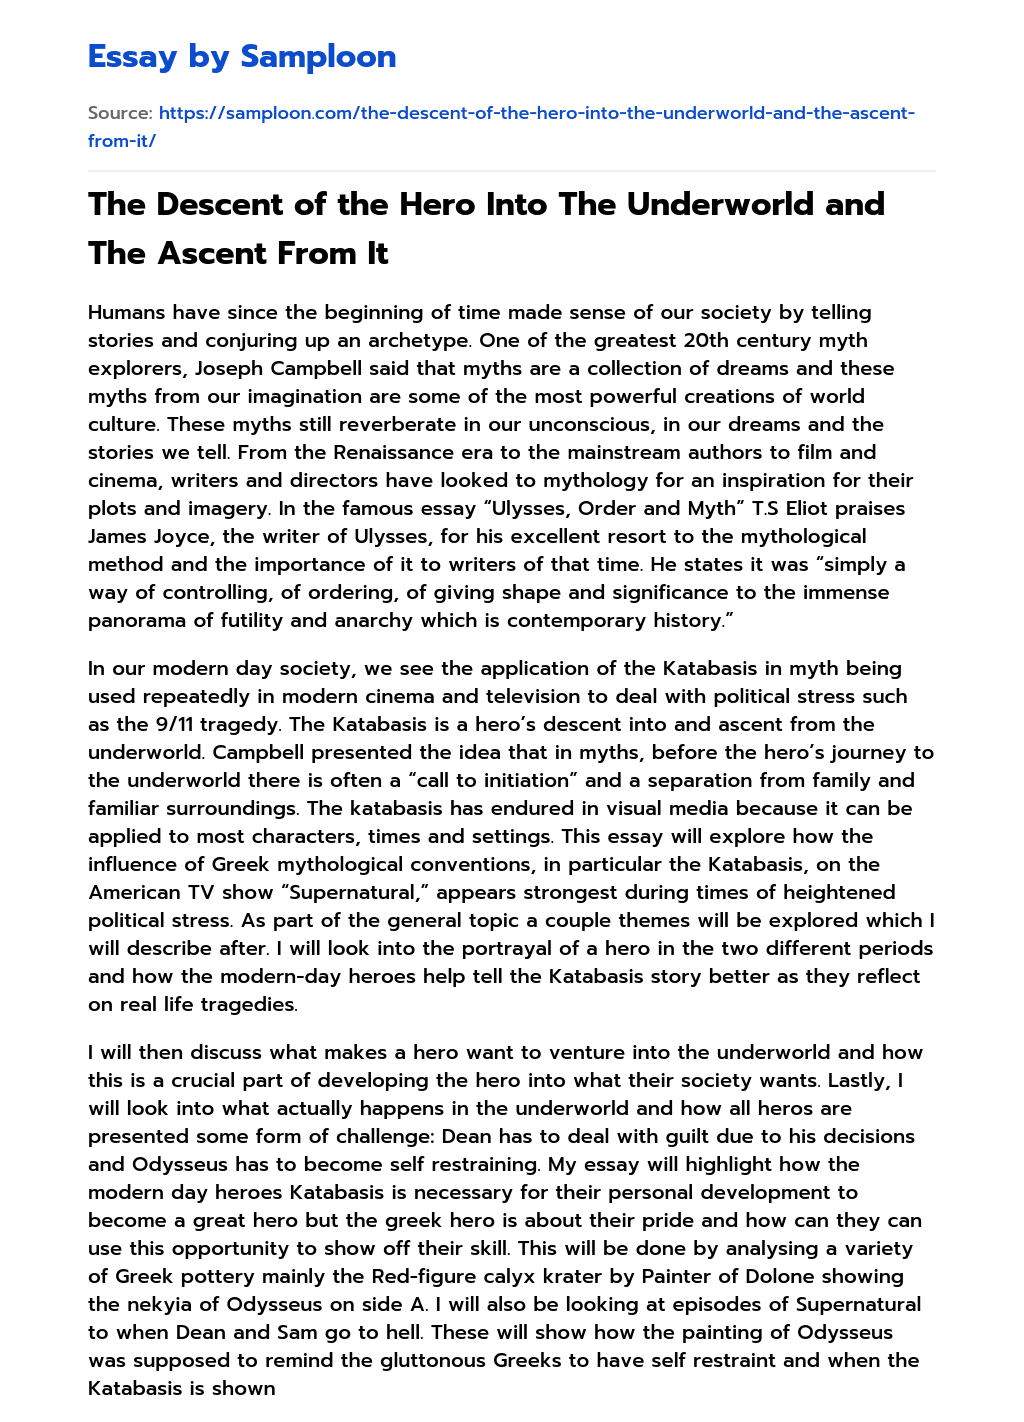 The Descent of the Hero Into The Underworld and The Ascent From It essay